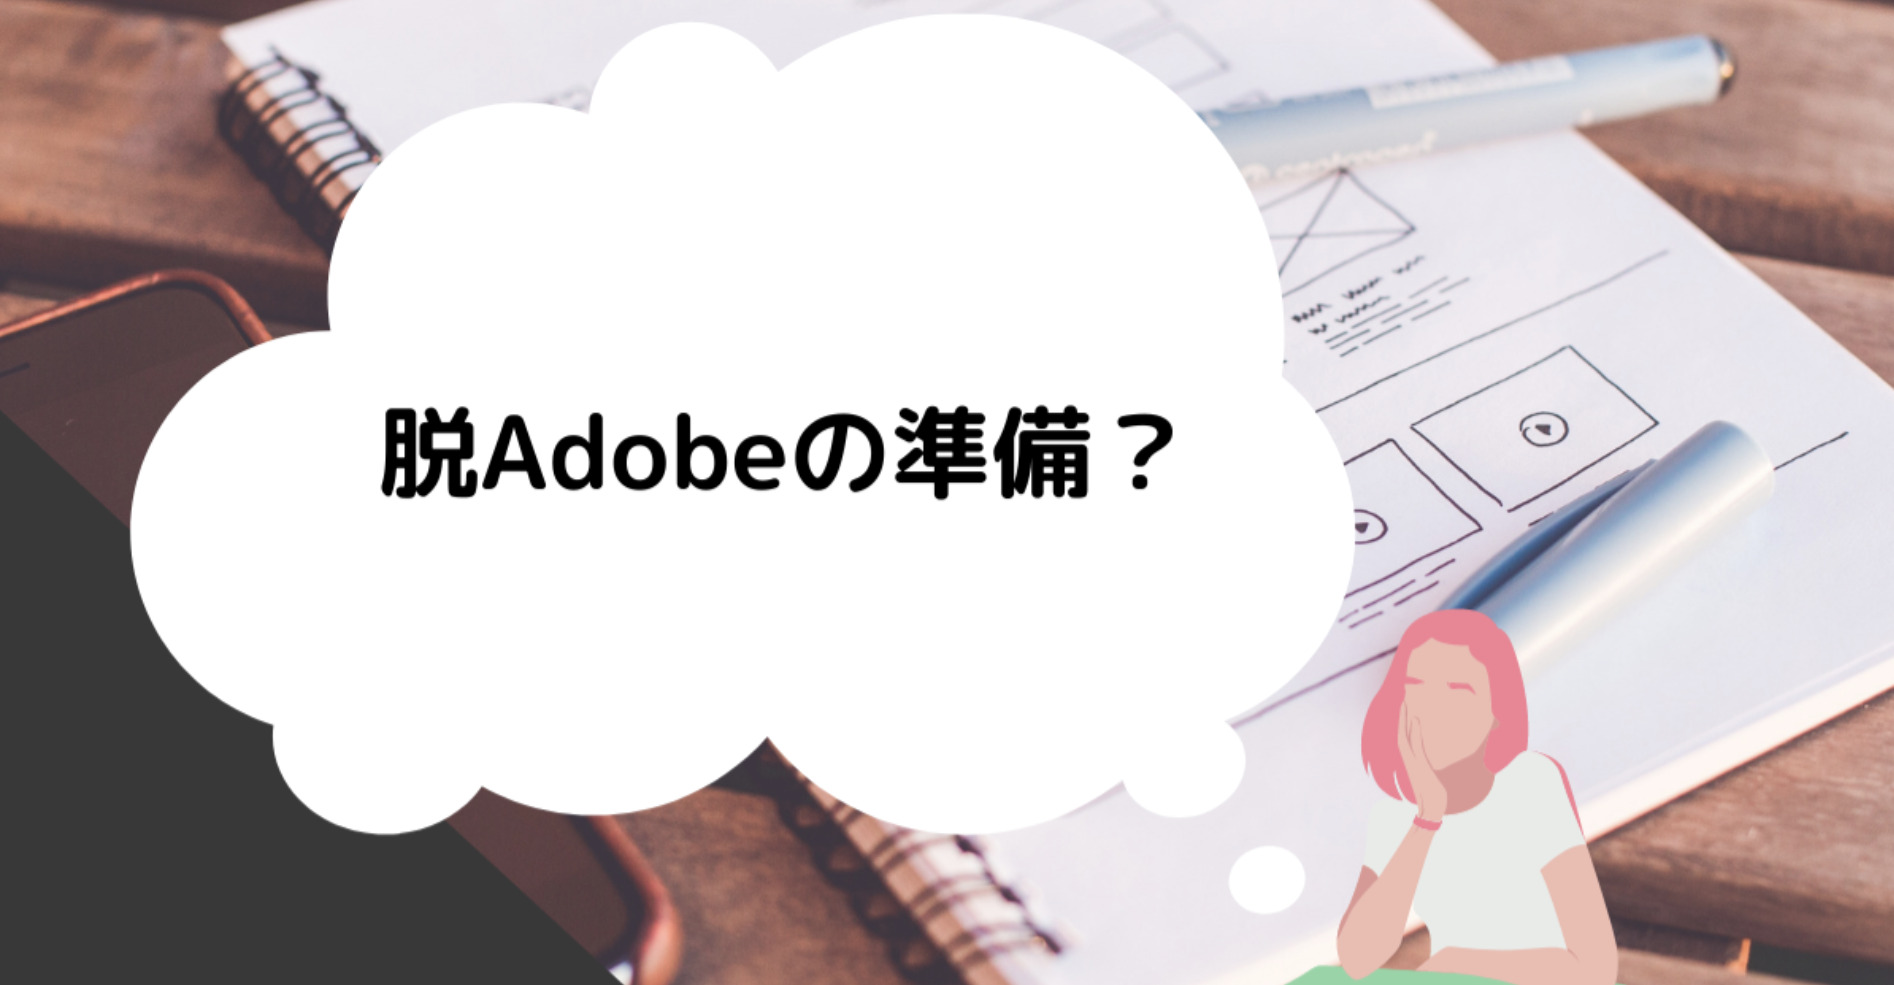 You are currently viewing 脱Adobeの準備？